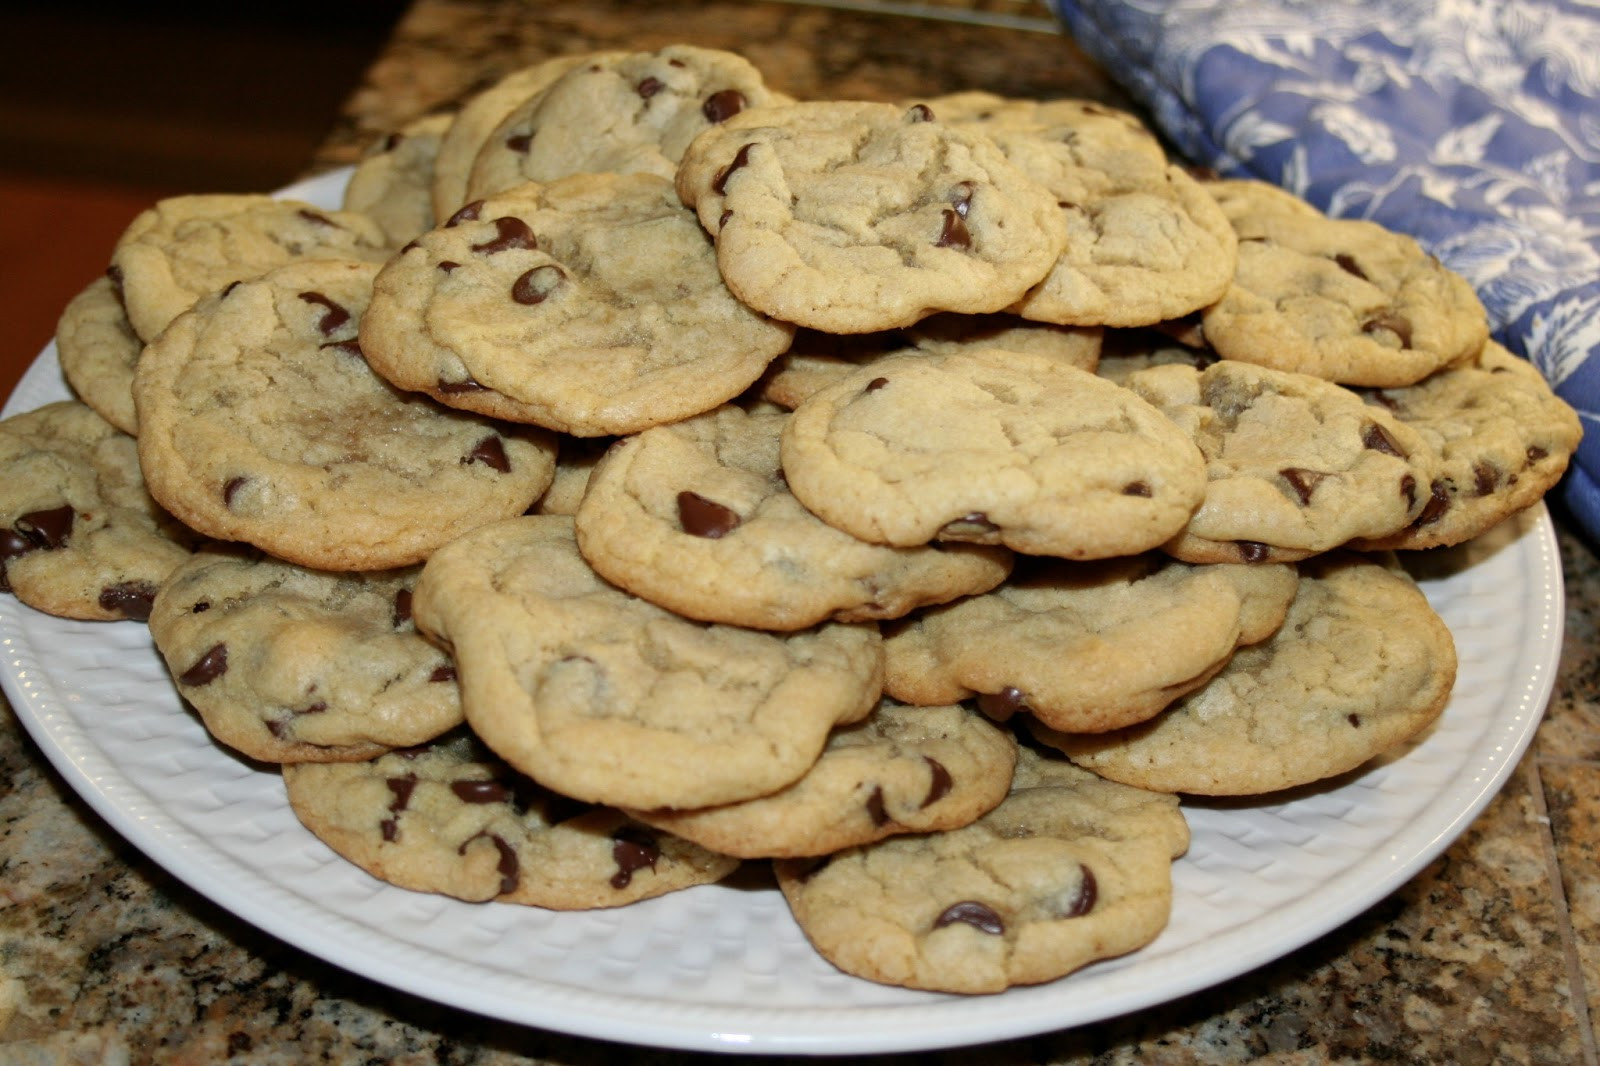 Soft Chewy Choc Chip Cookies Recipe
 Home Trends Utah Soft Chewy Chocolate Chip Cookies made